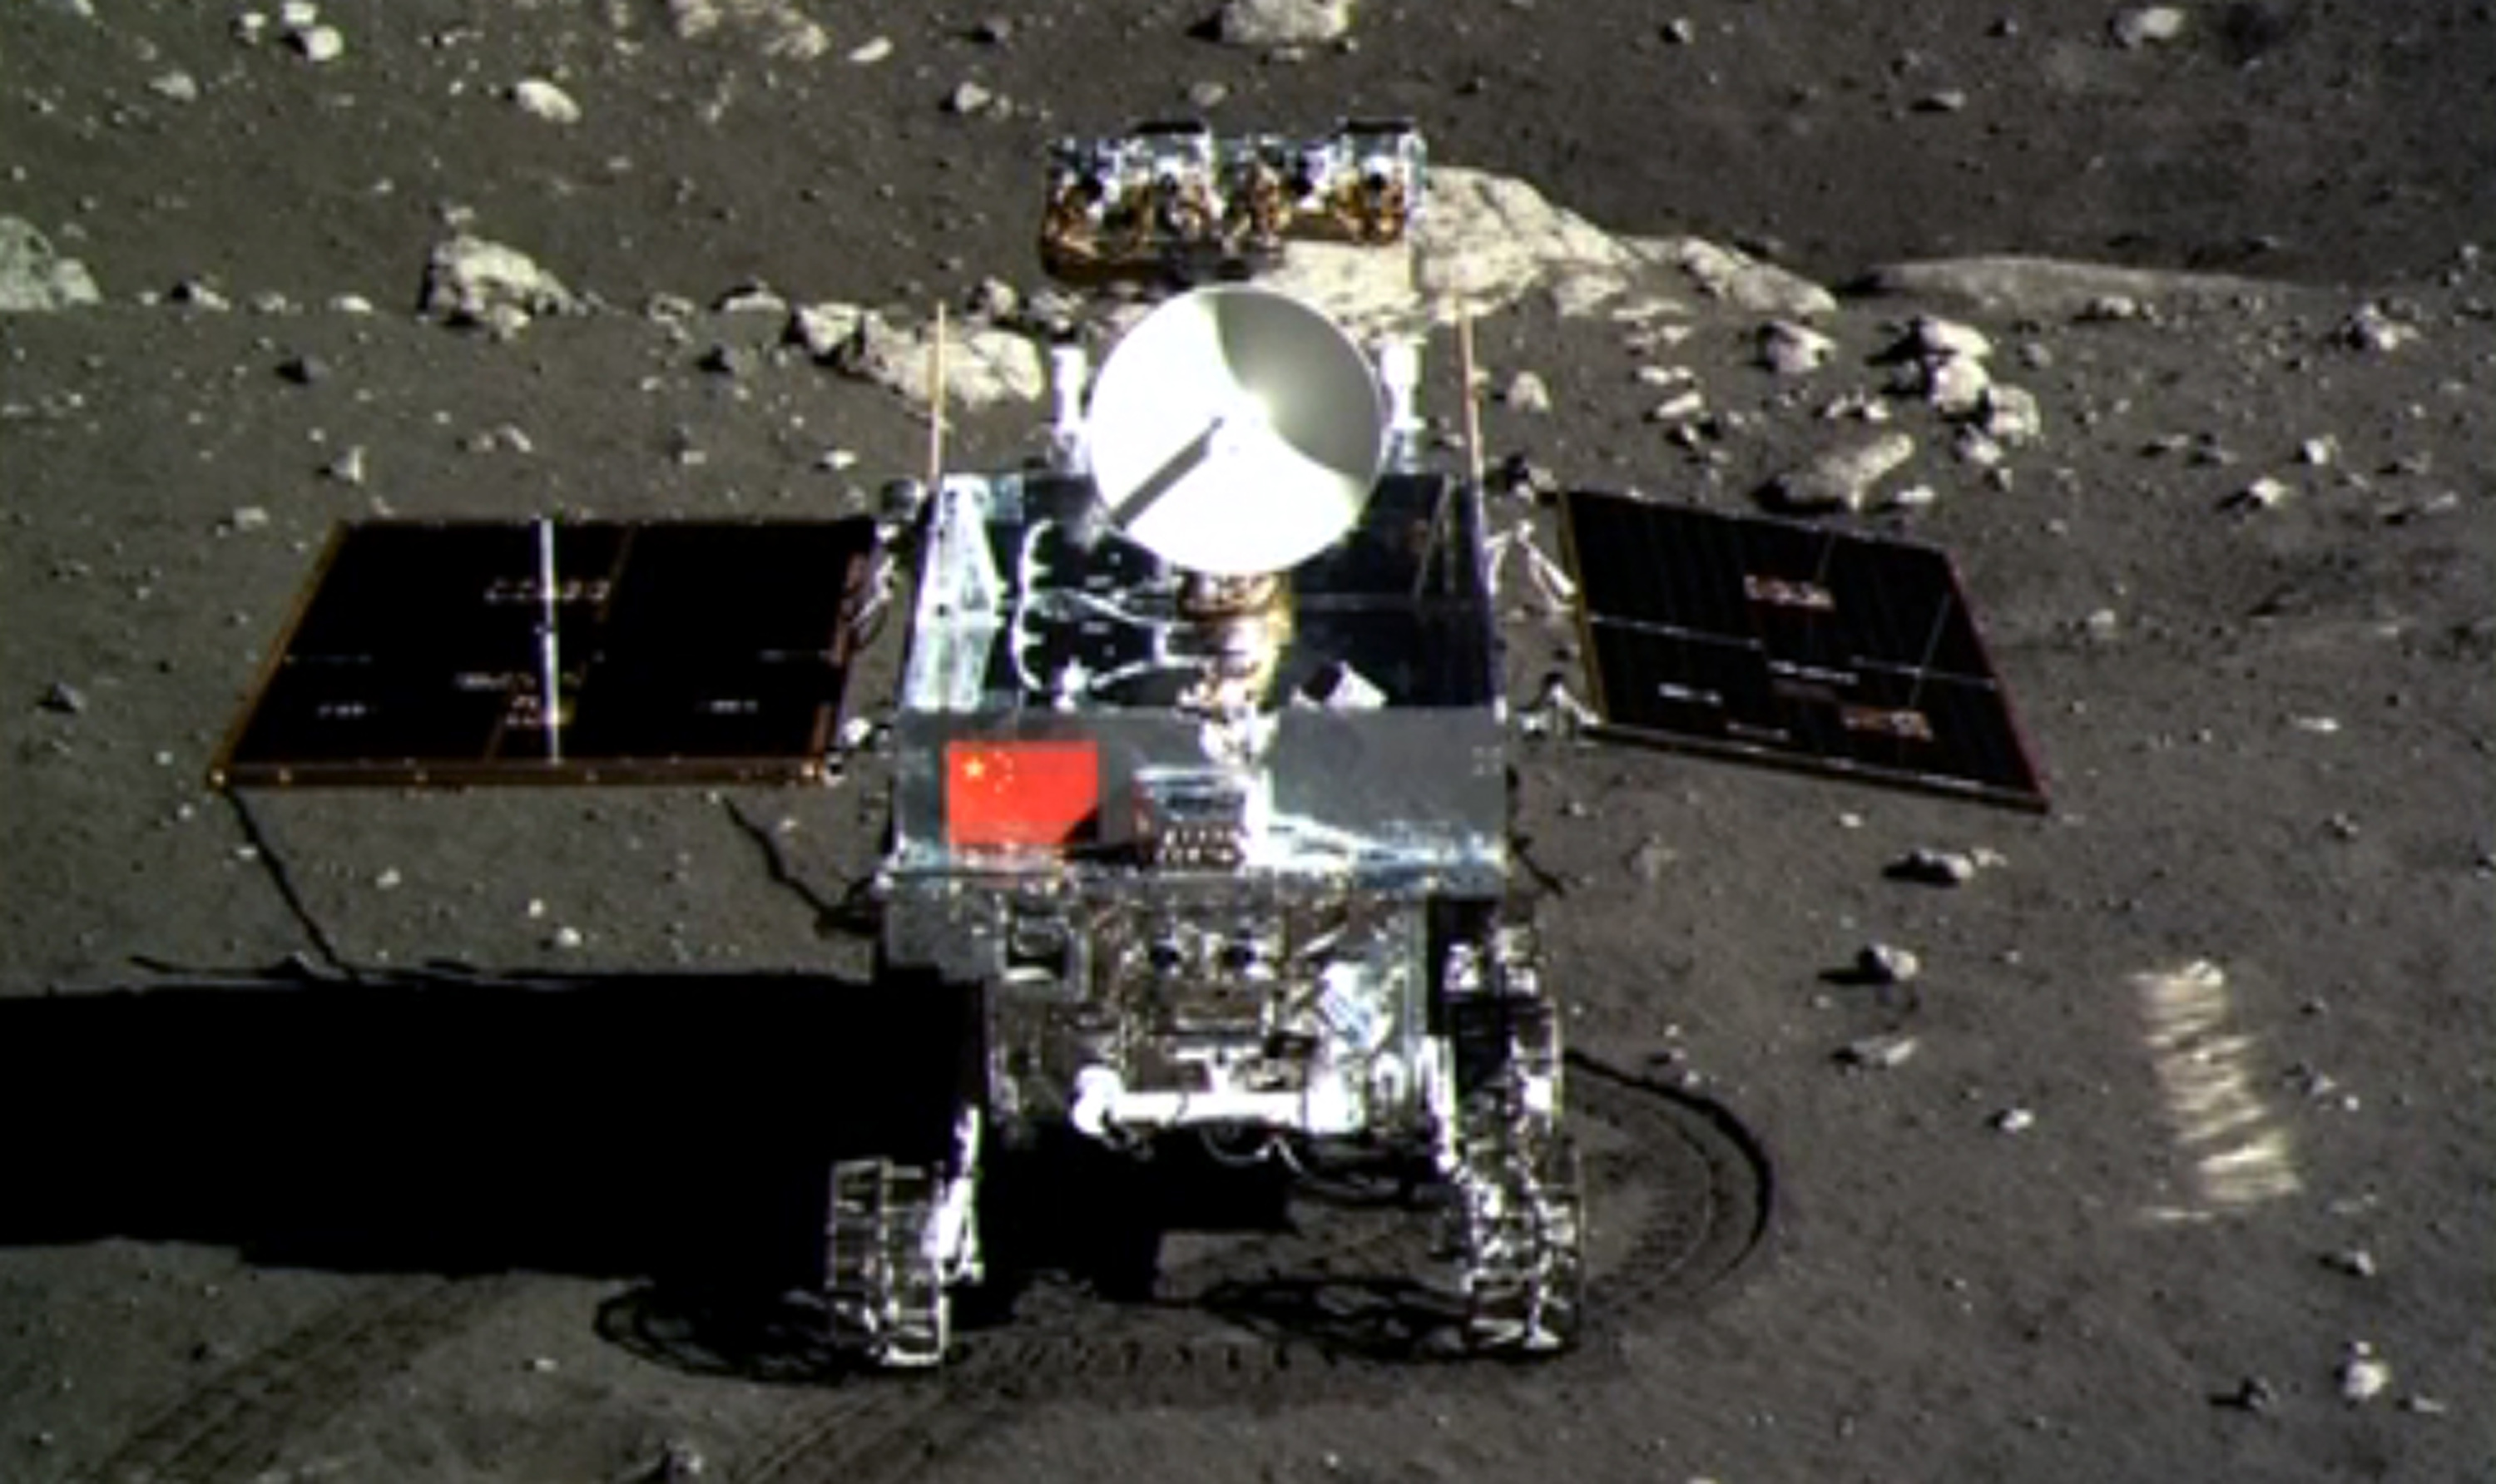 A photo of the Jade Rabbit moon rover taken by the Chang'e-3 probe lander on December 15, 2013. Photo: AFP